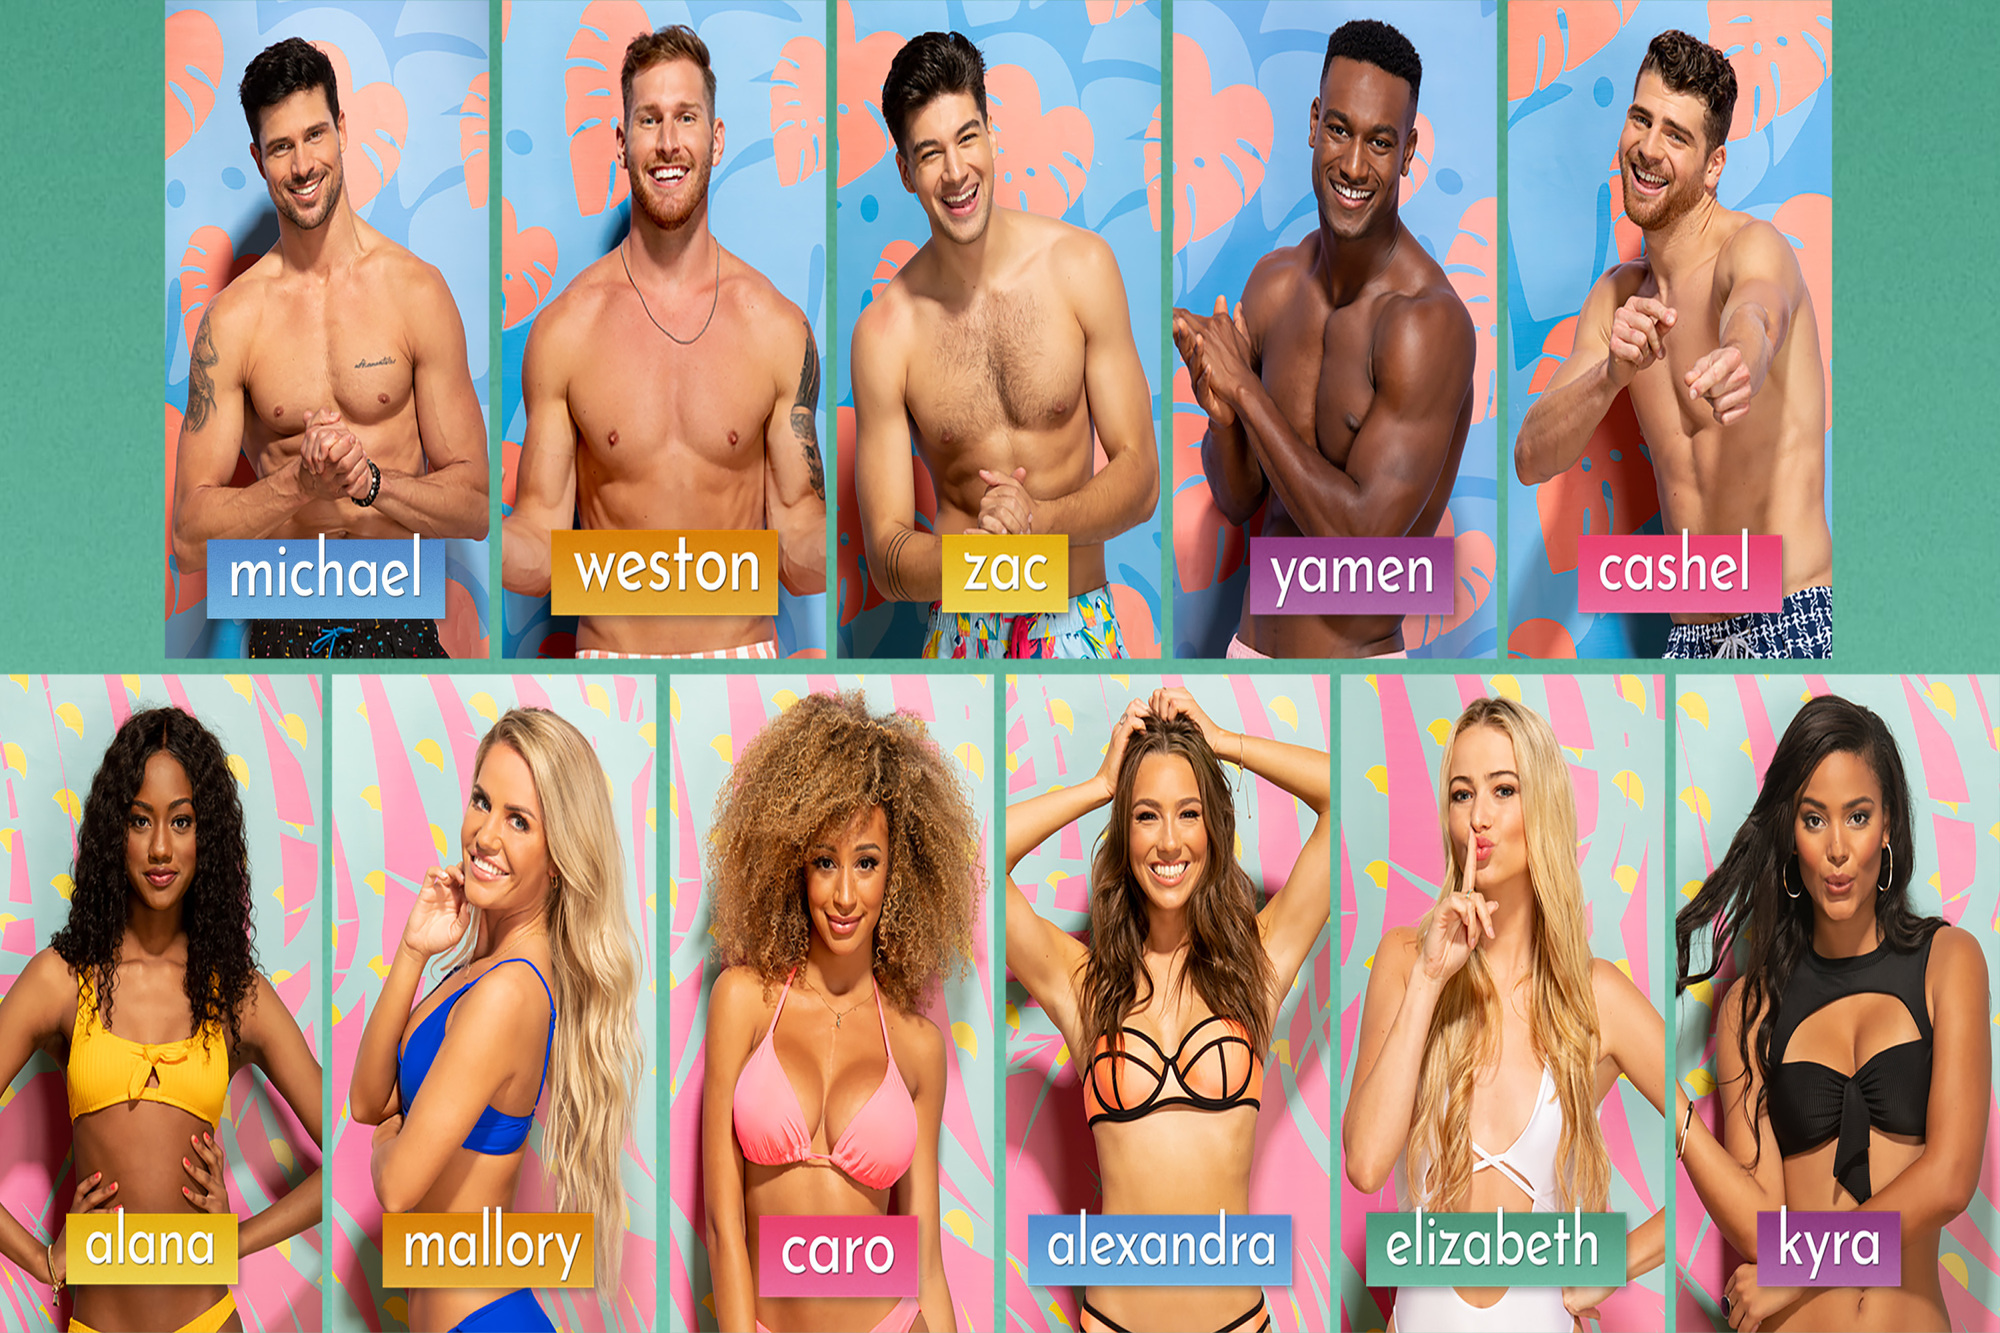 brian nidiffer recommends love island naked pic